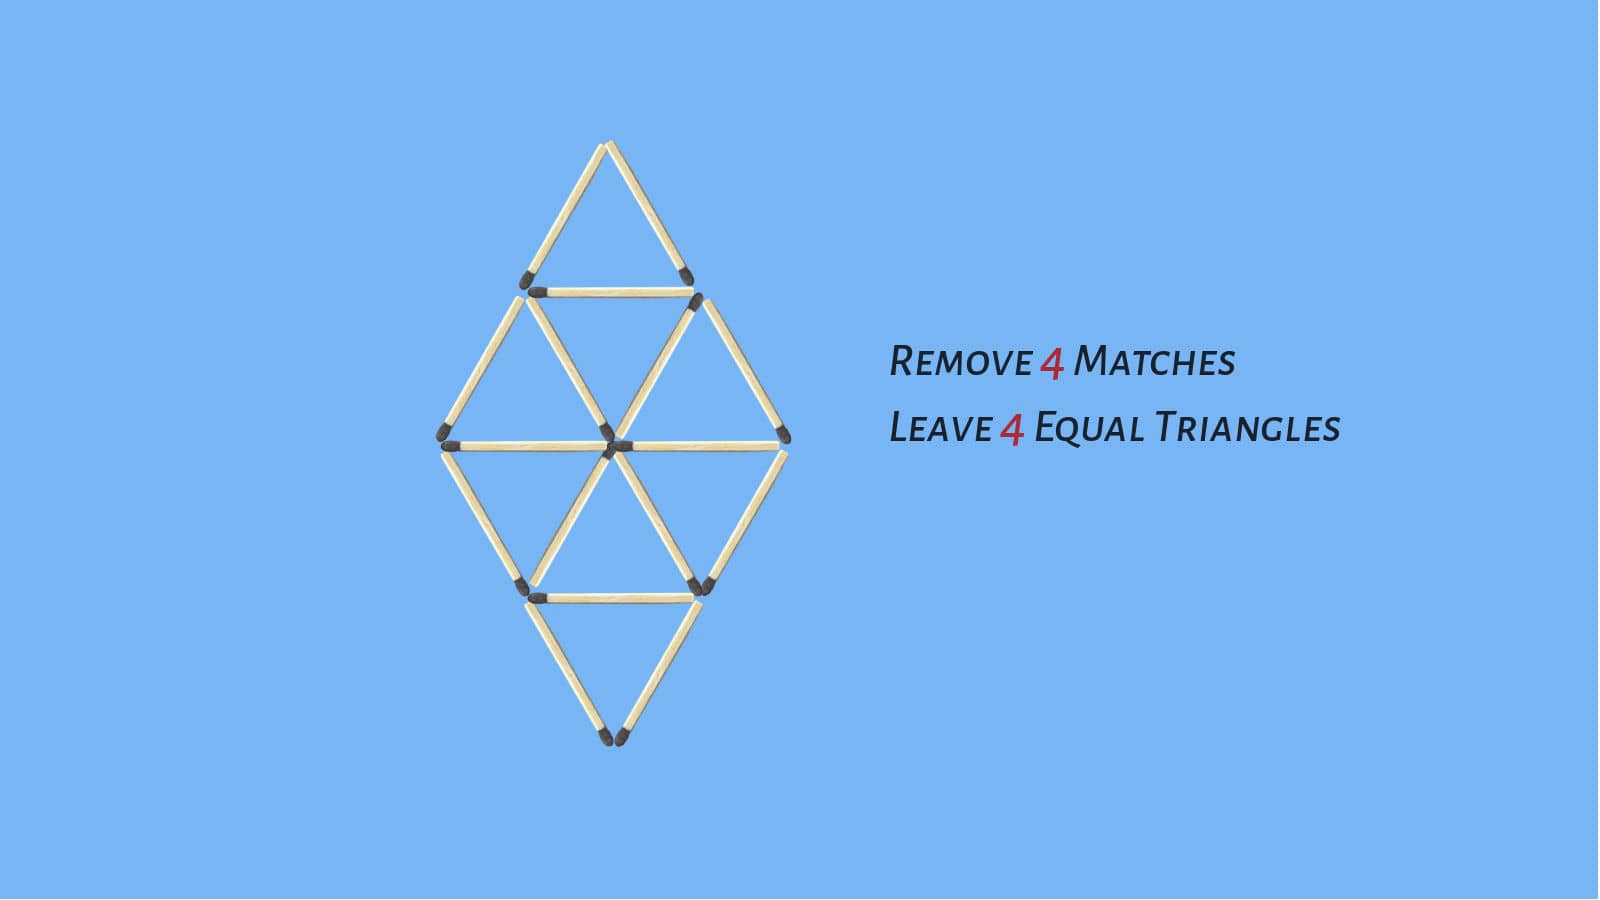 Remove 4 matches to leave 4 equal triangles puzzle